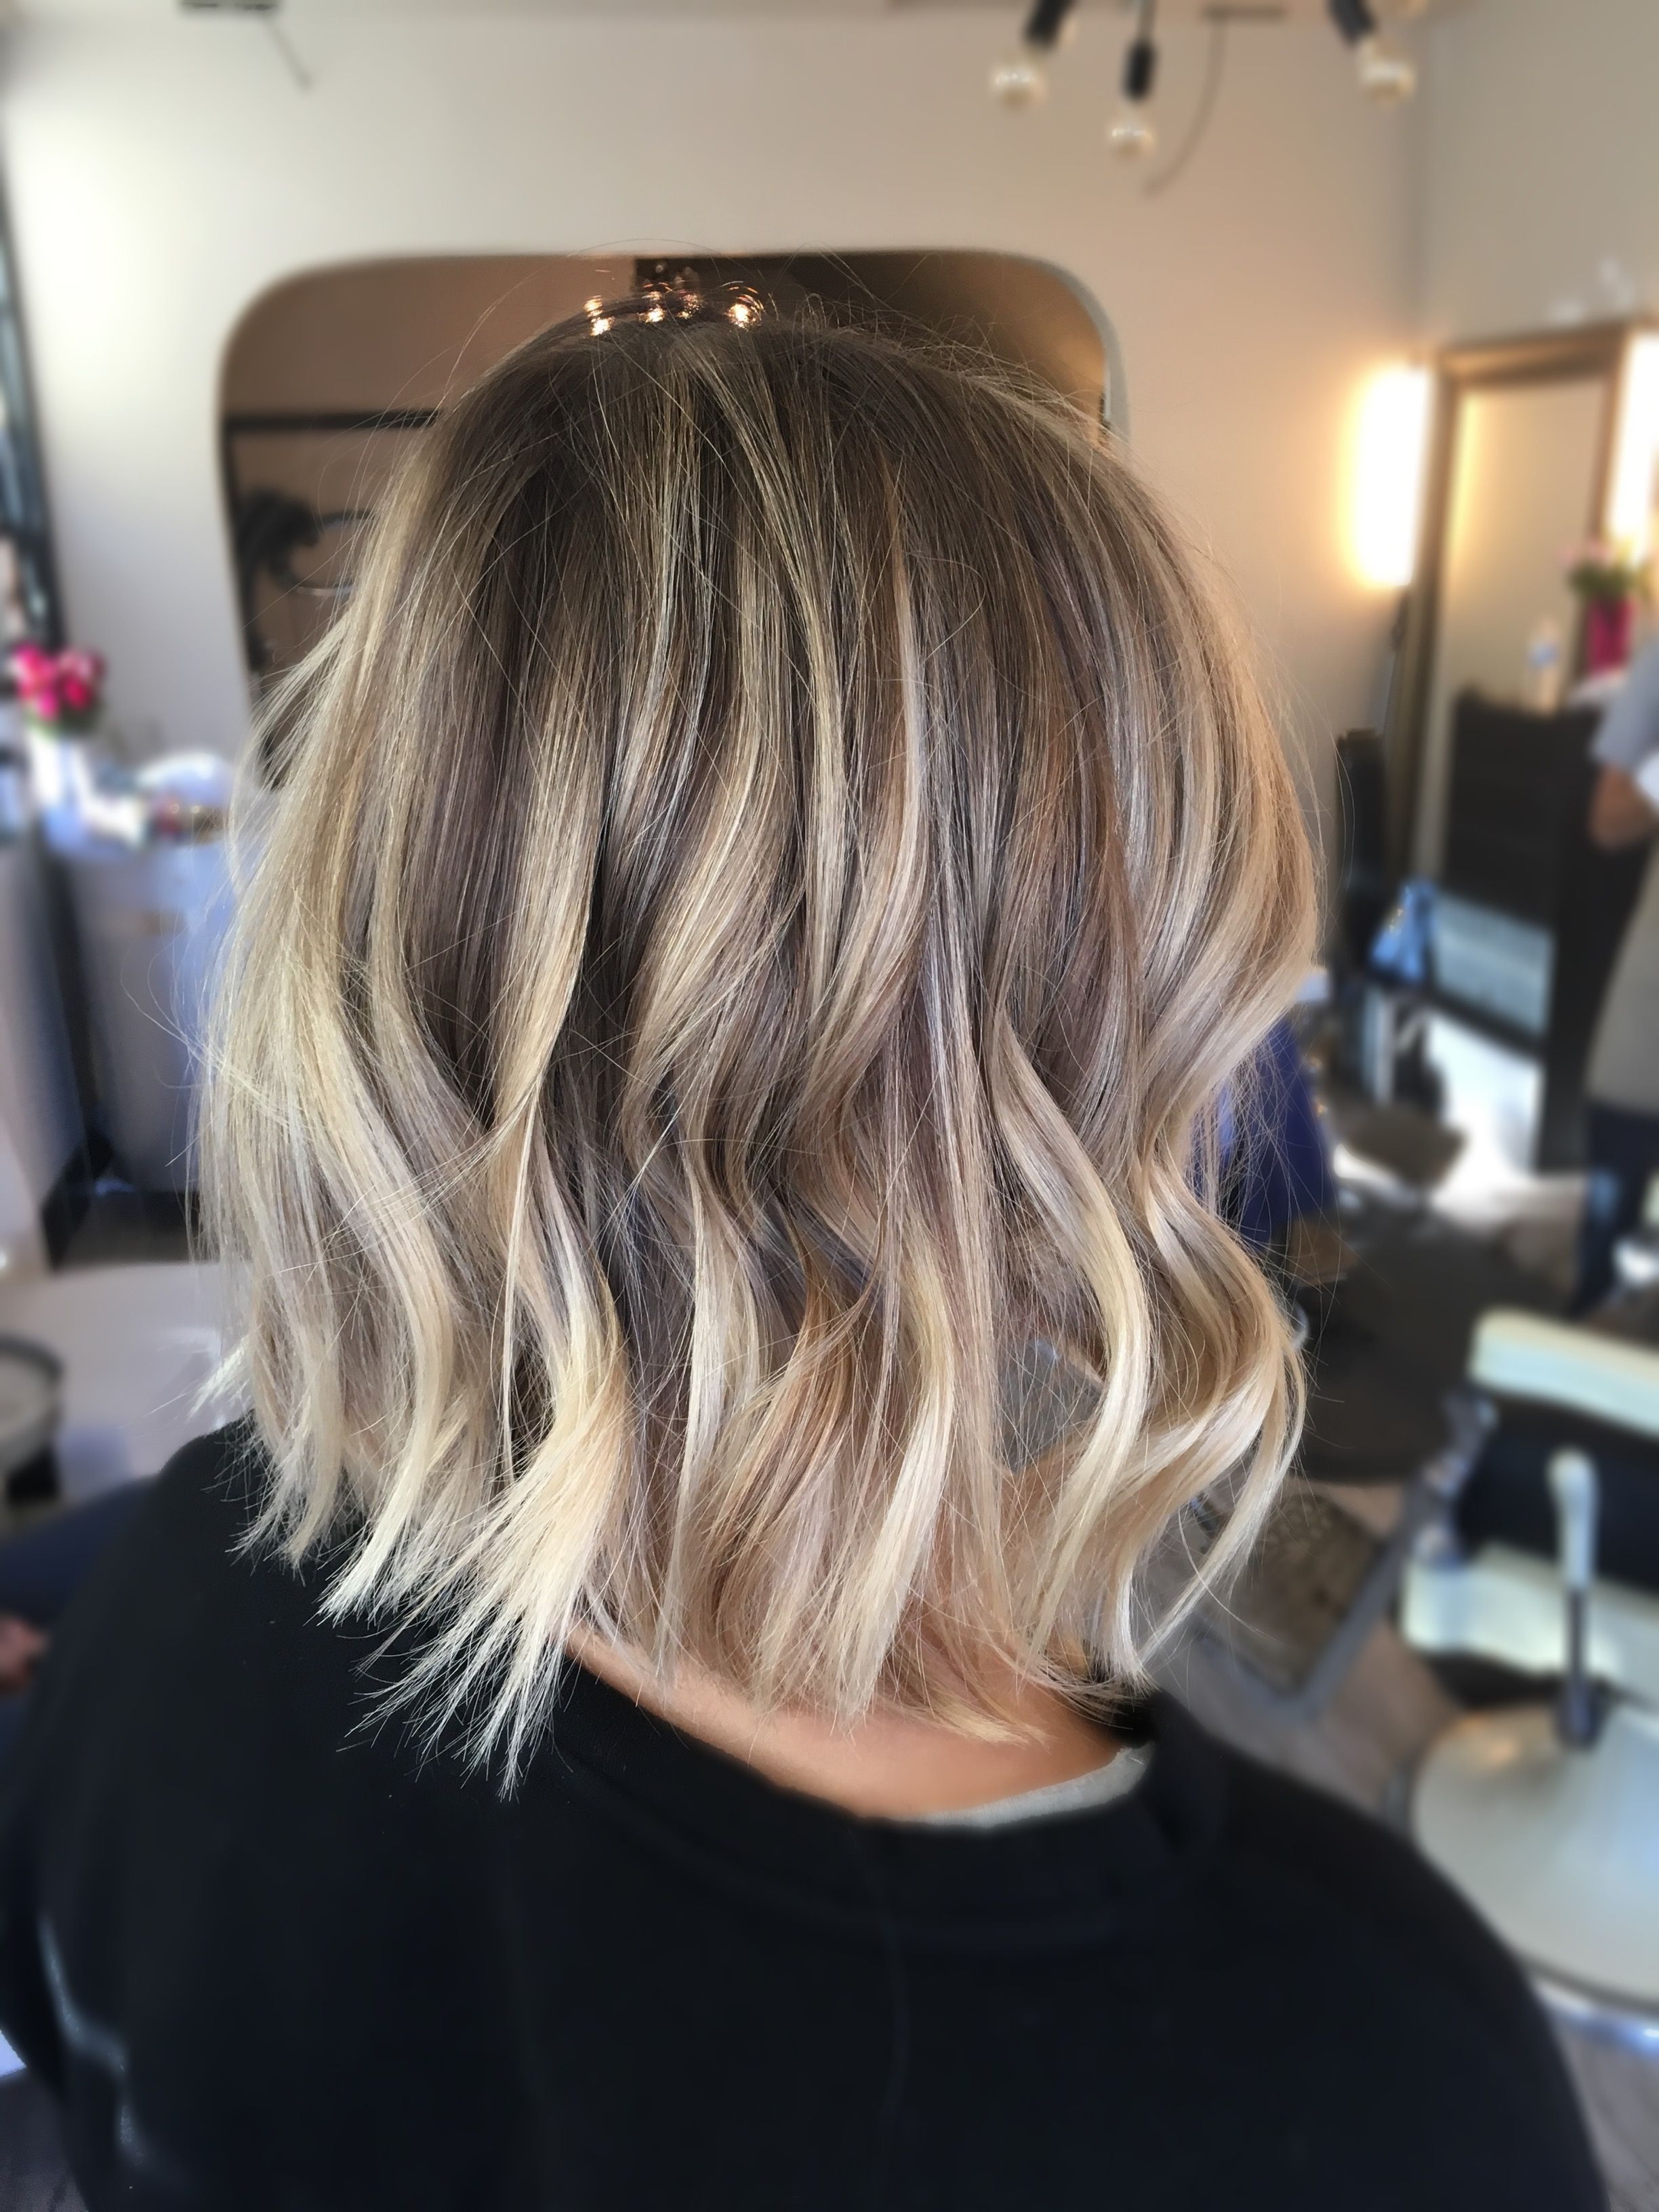 Current Razored Blonde Lob Hairstyles Throughout Blonde Dimensional Balayage :) And A Long Bob Razored For Texture (View 3 of 20)